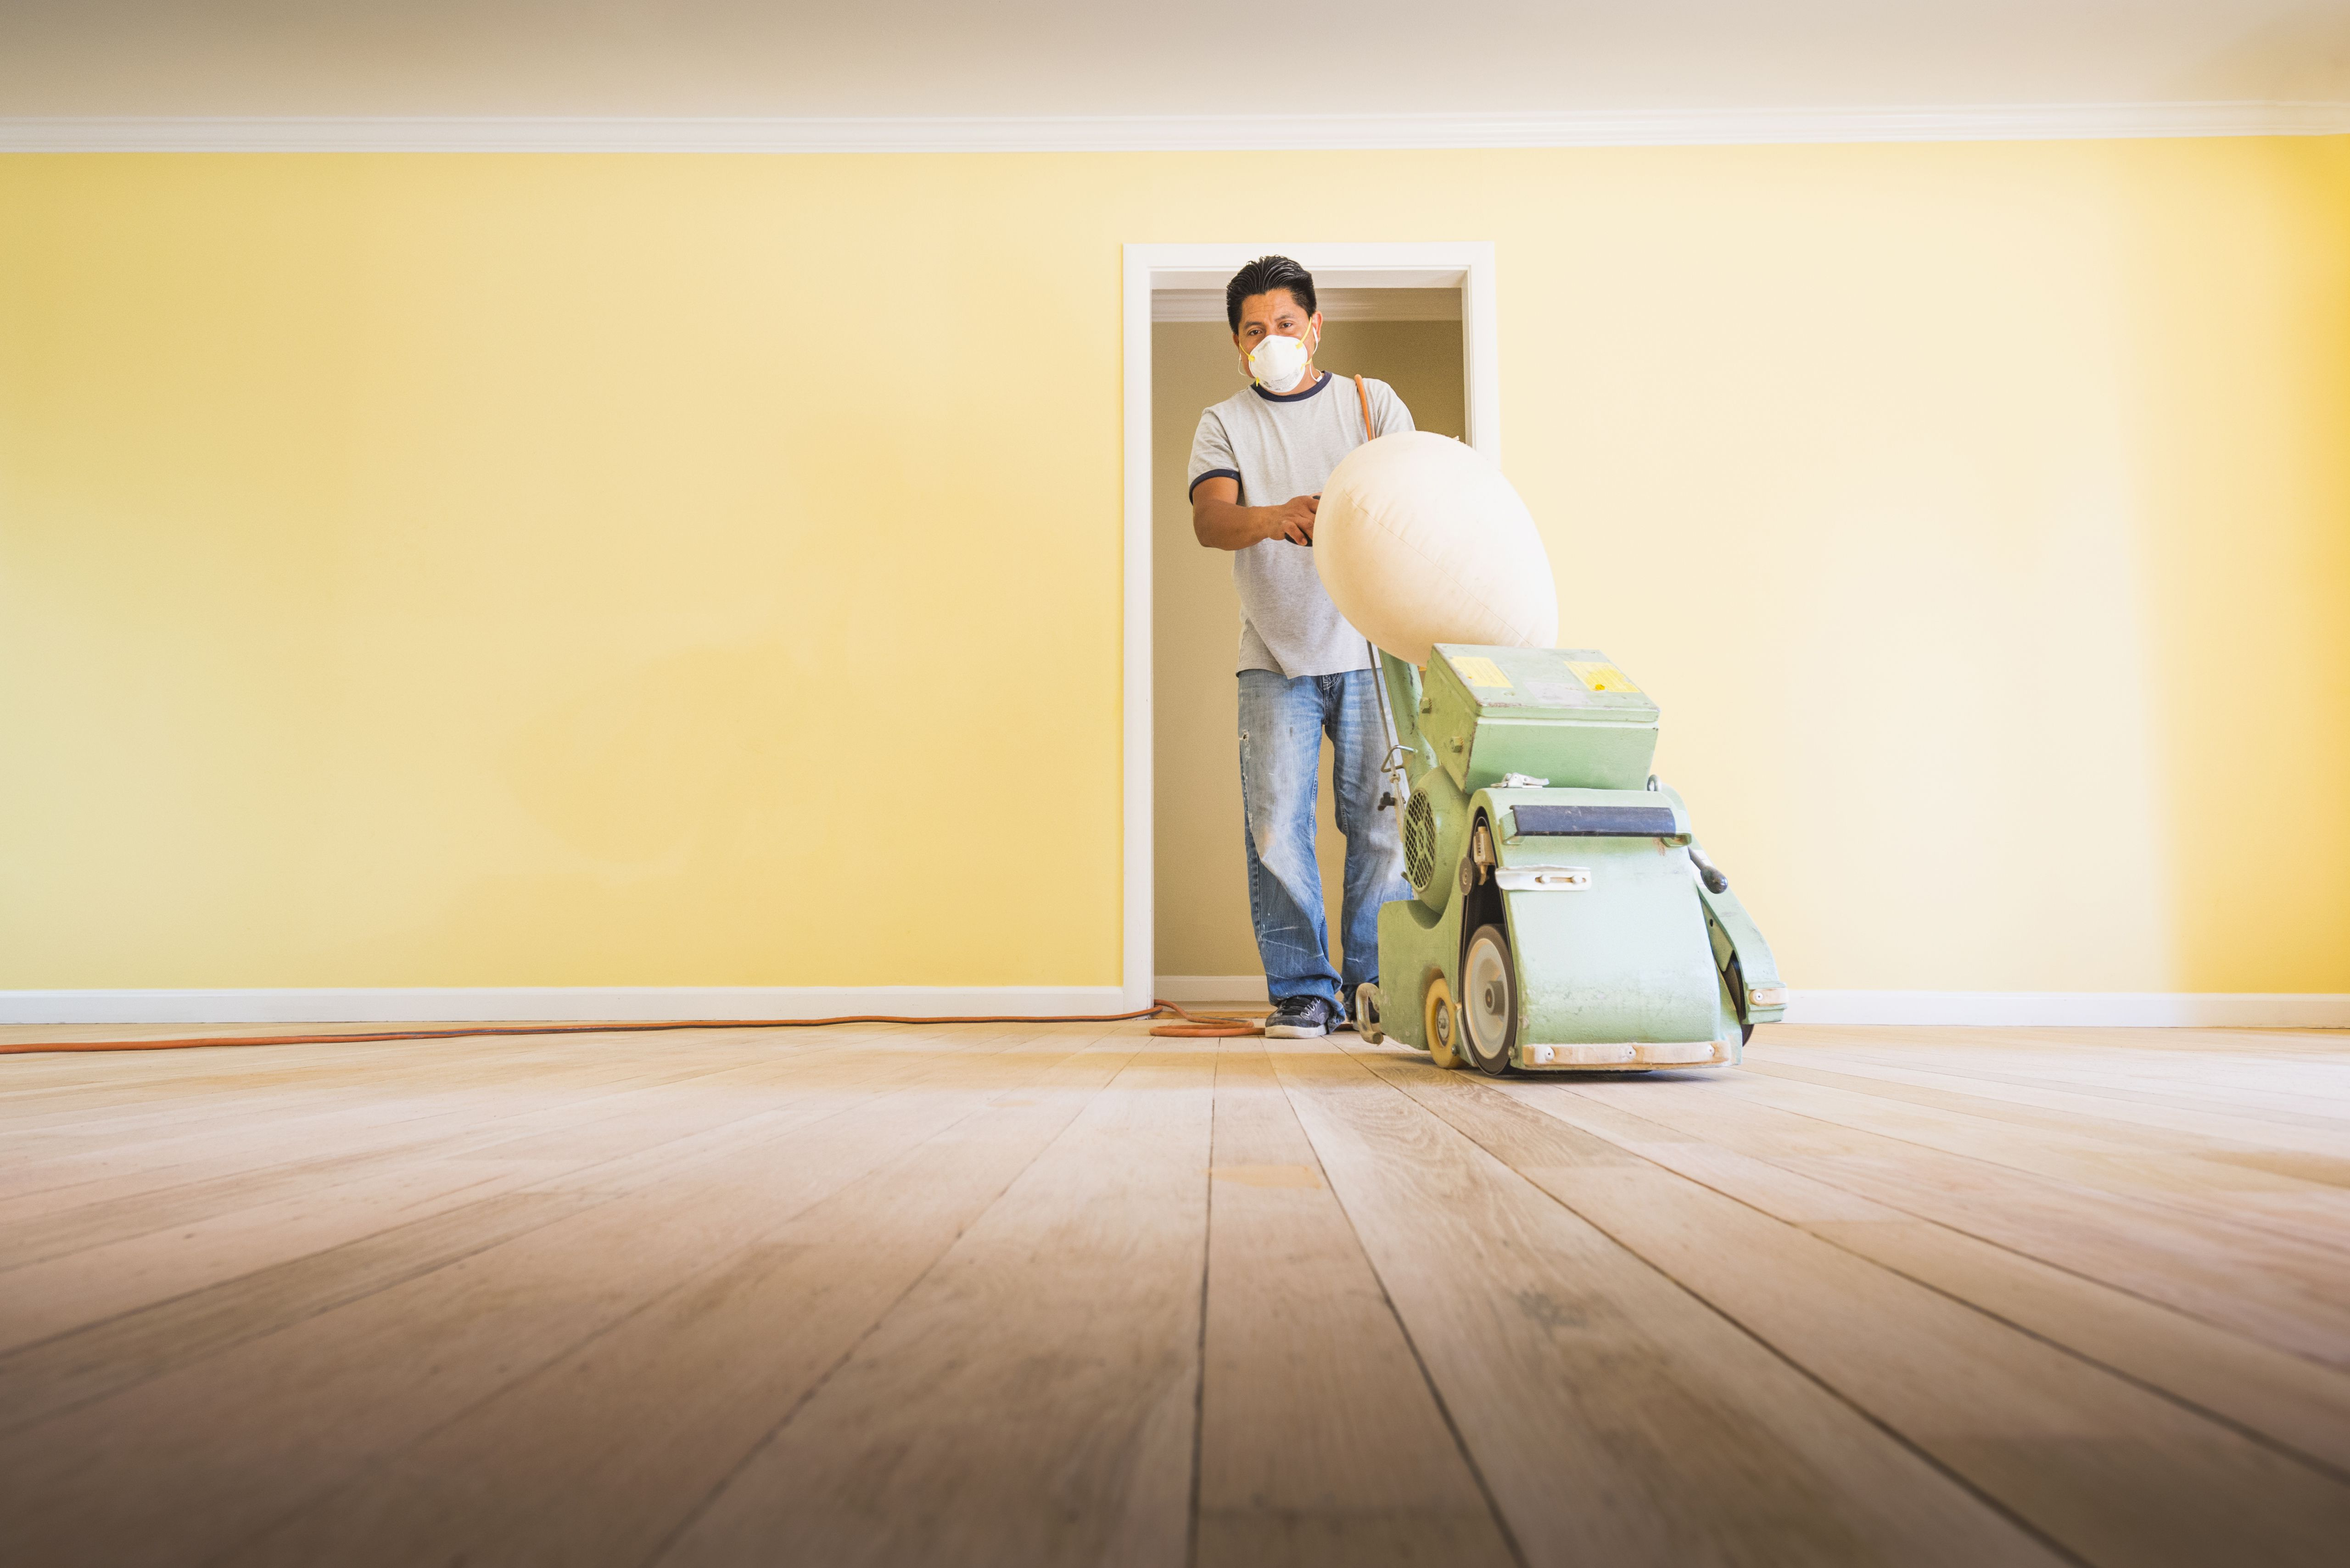 13 Popular Getting Paint Off Hardwood Floors 2022 free download getting paint off hardwood floors of should you paint walls or refinish floors first intended for floorsandingafterpainting 5a8f08dfae9ab80037d9d878